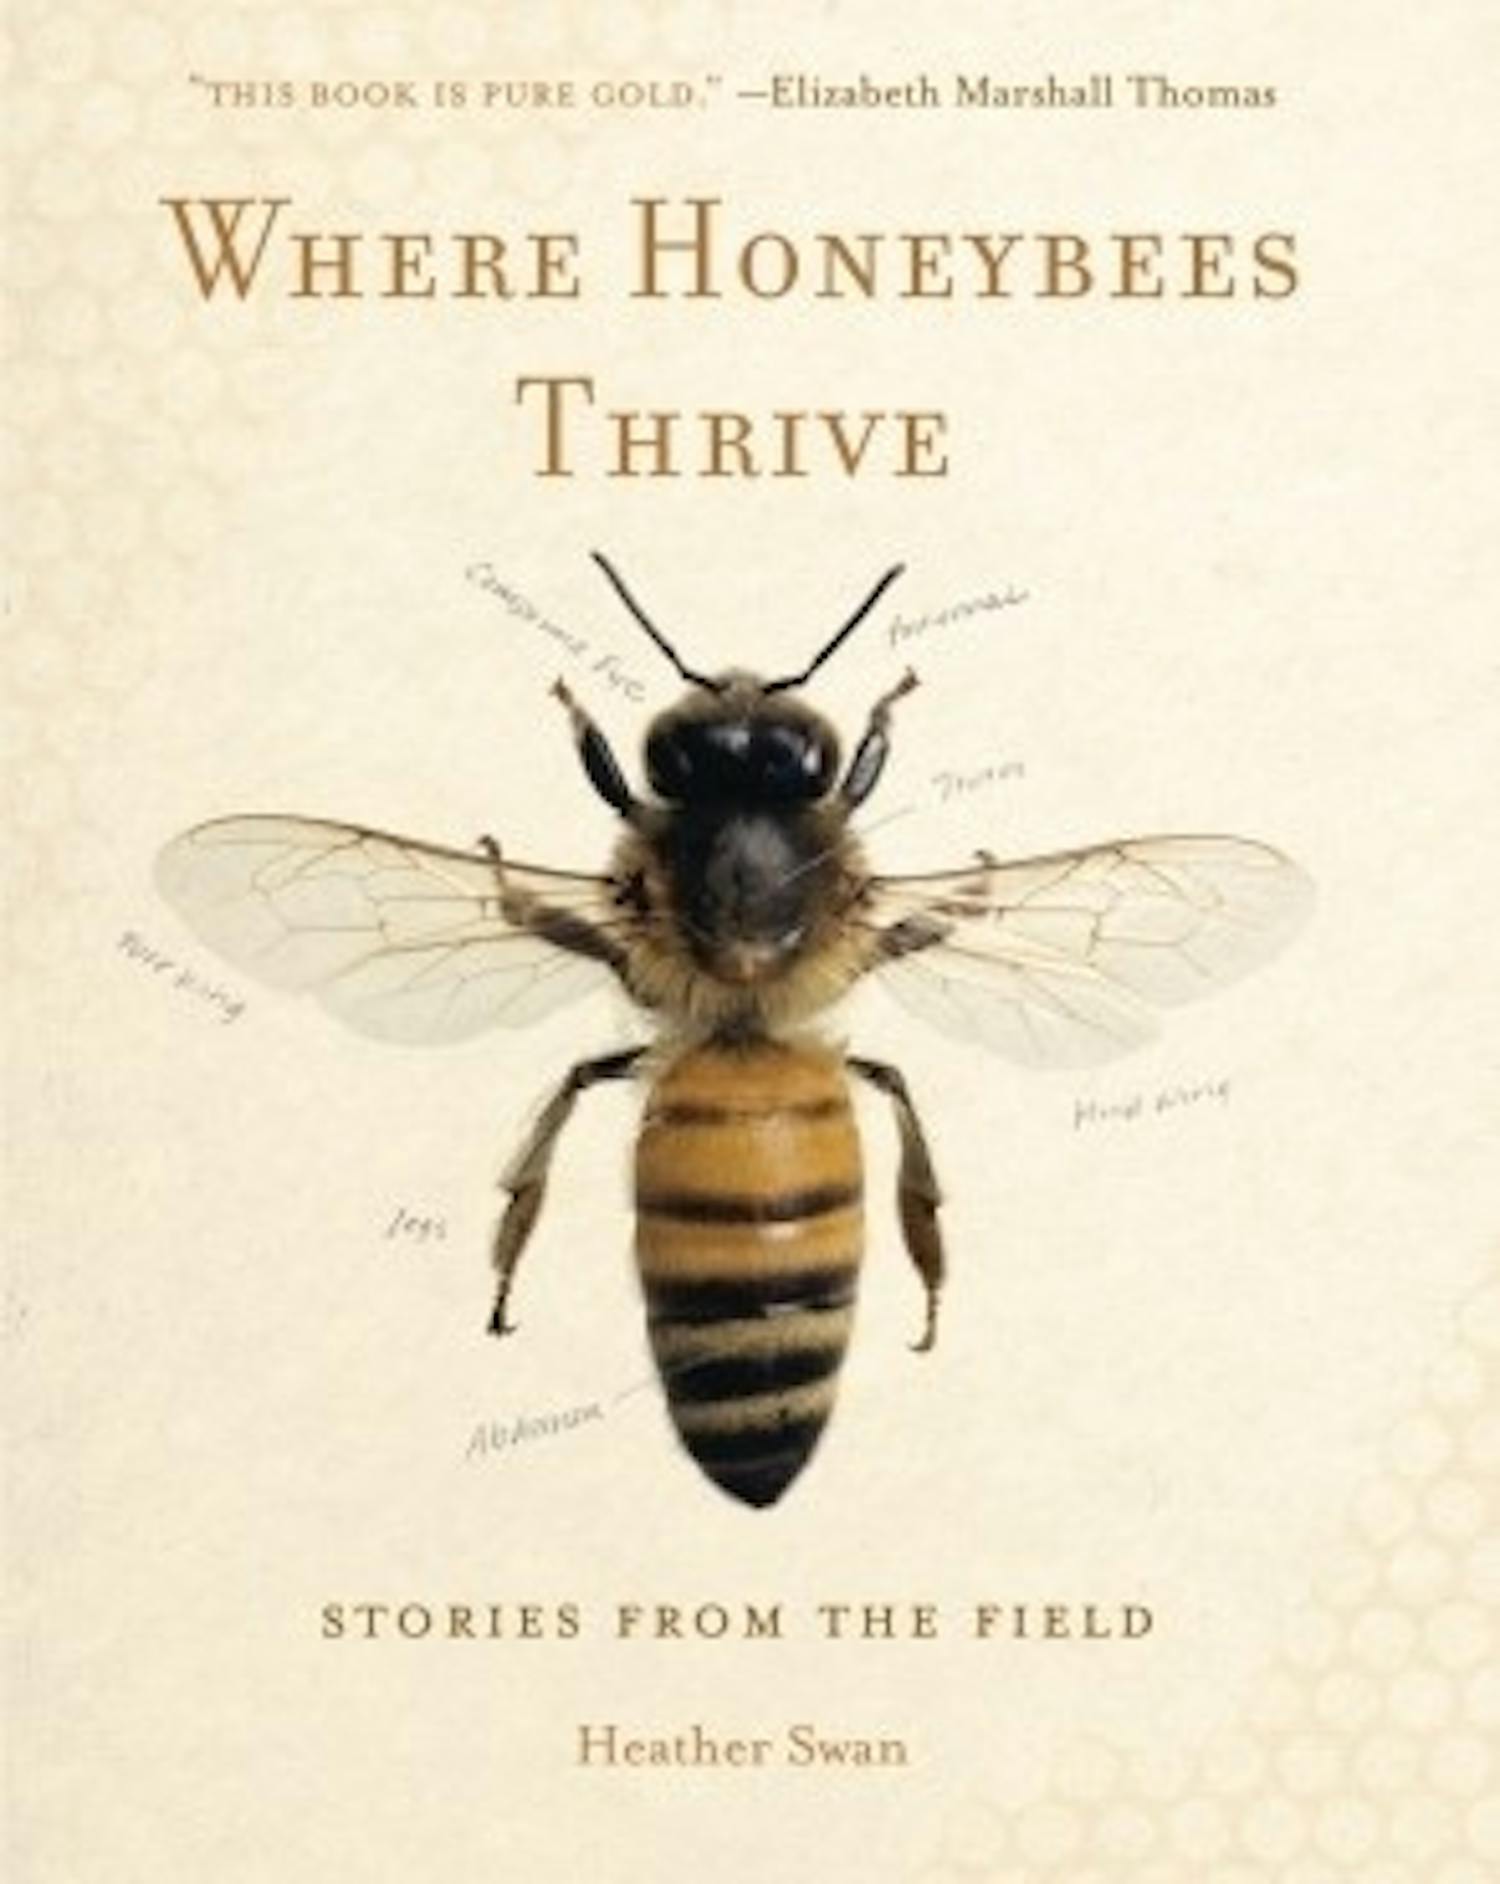 Swan defends the honeybee’s legitimacy against public indifference in her&nbsp;powerful new book.